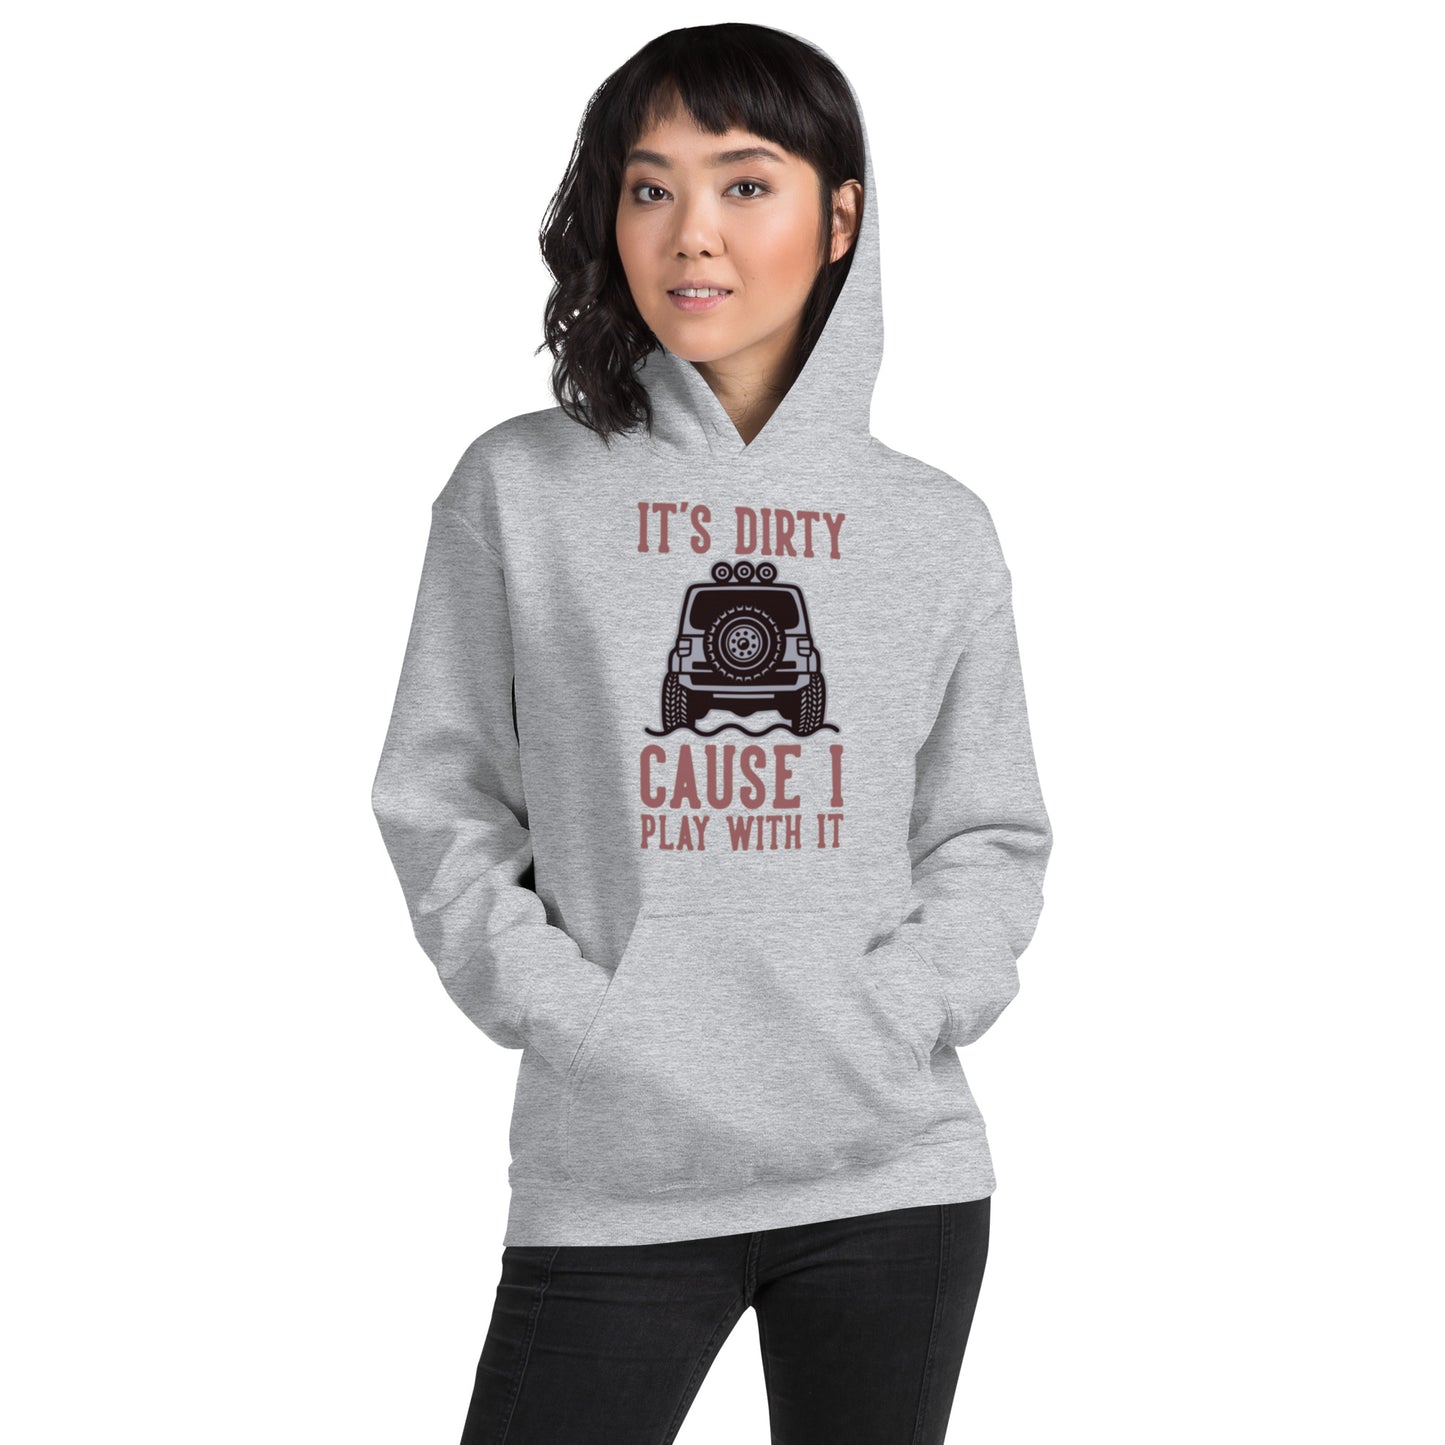 It's Dirty, Cause I Play With It Unisex Hoodie